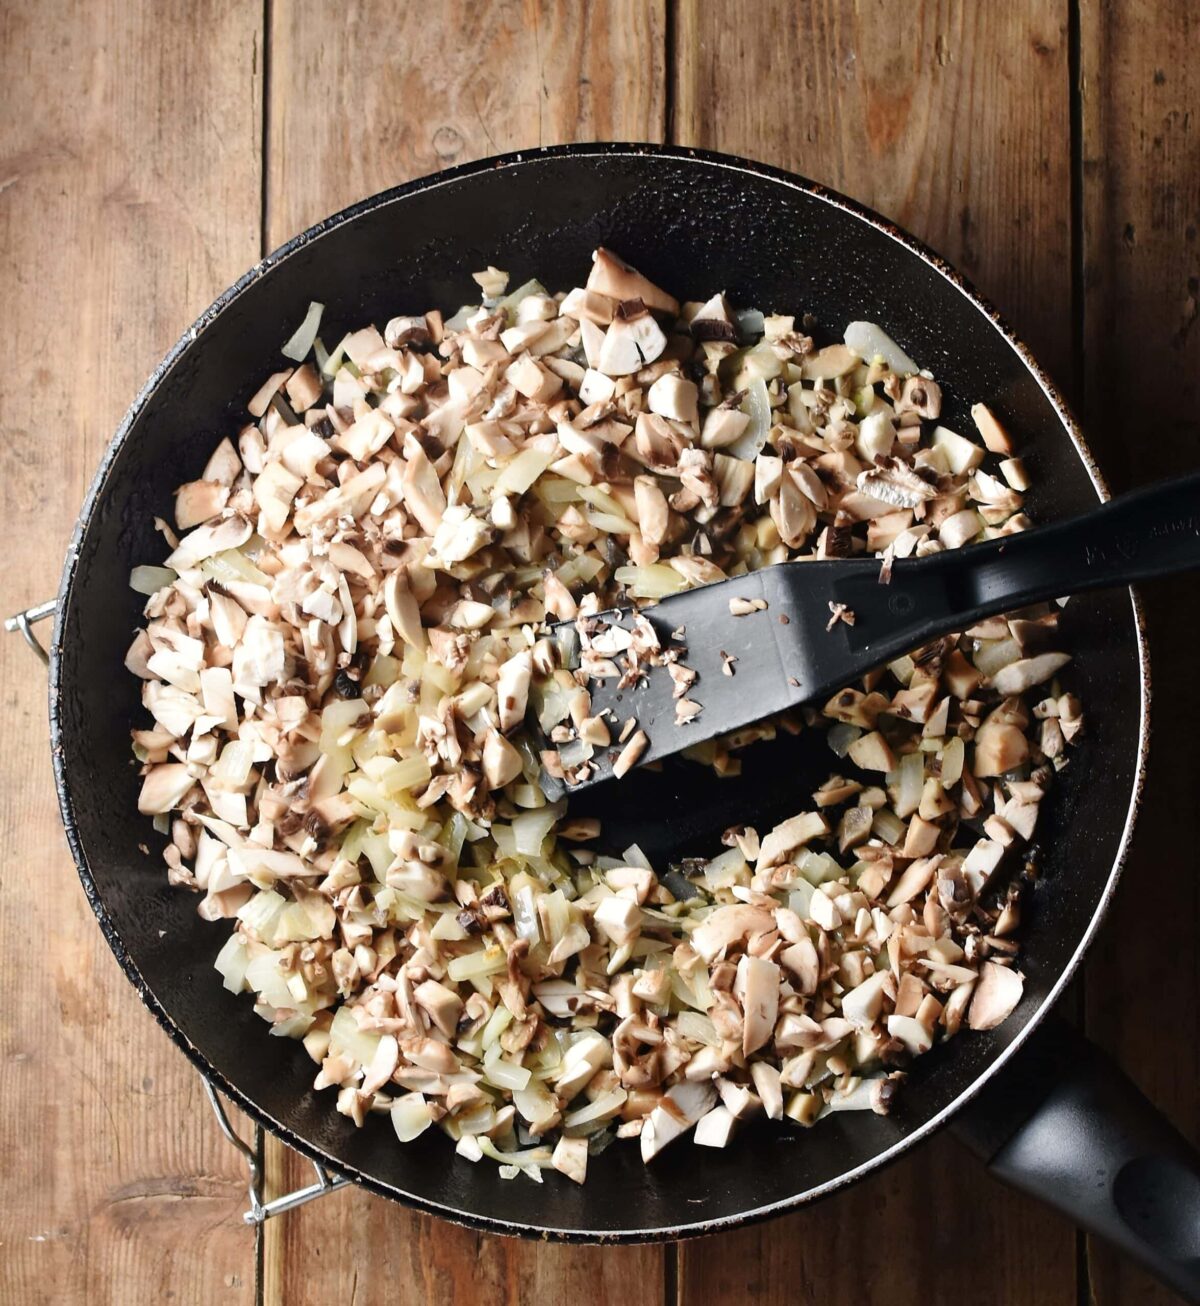 Chopped mushrooms and onion in skillet with black spatula.